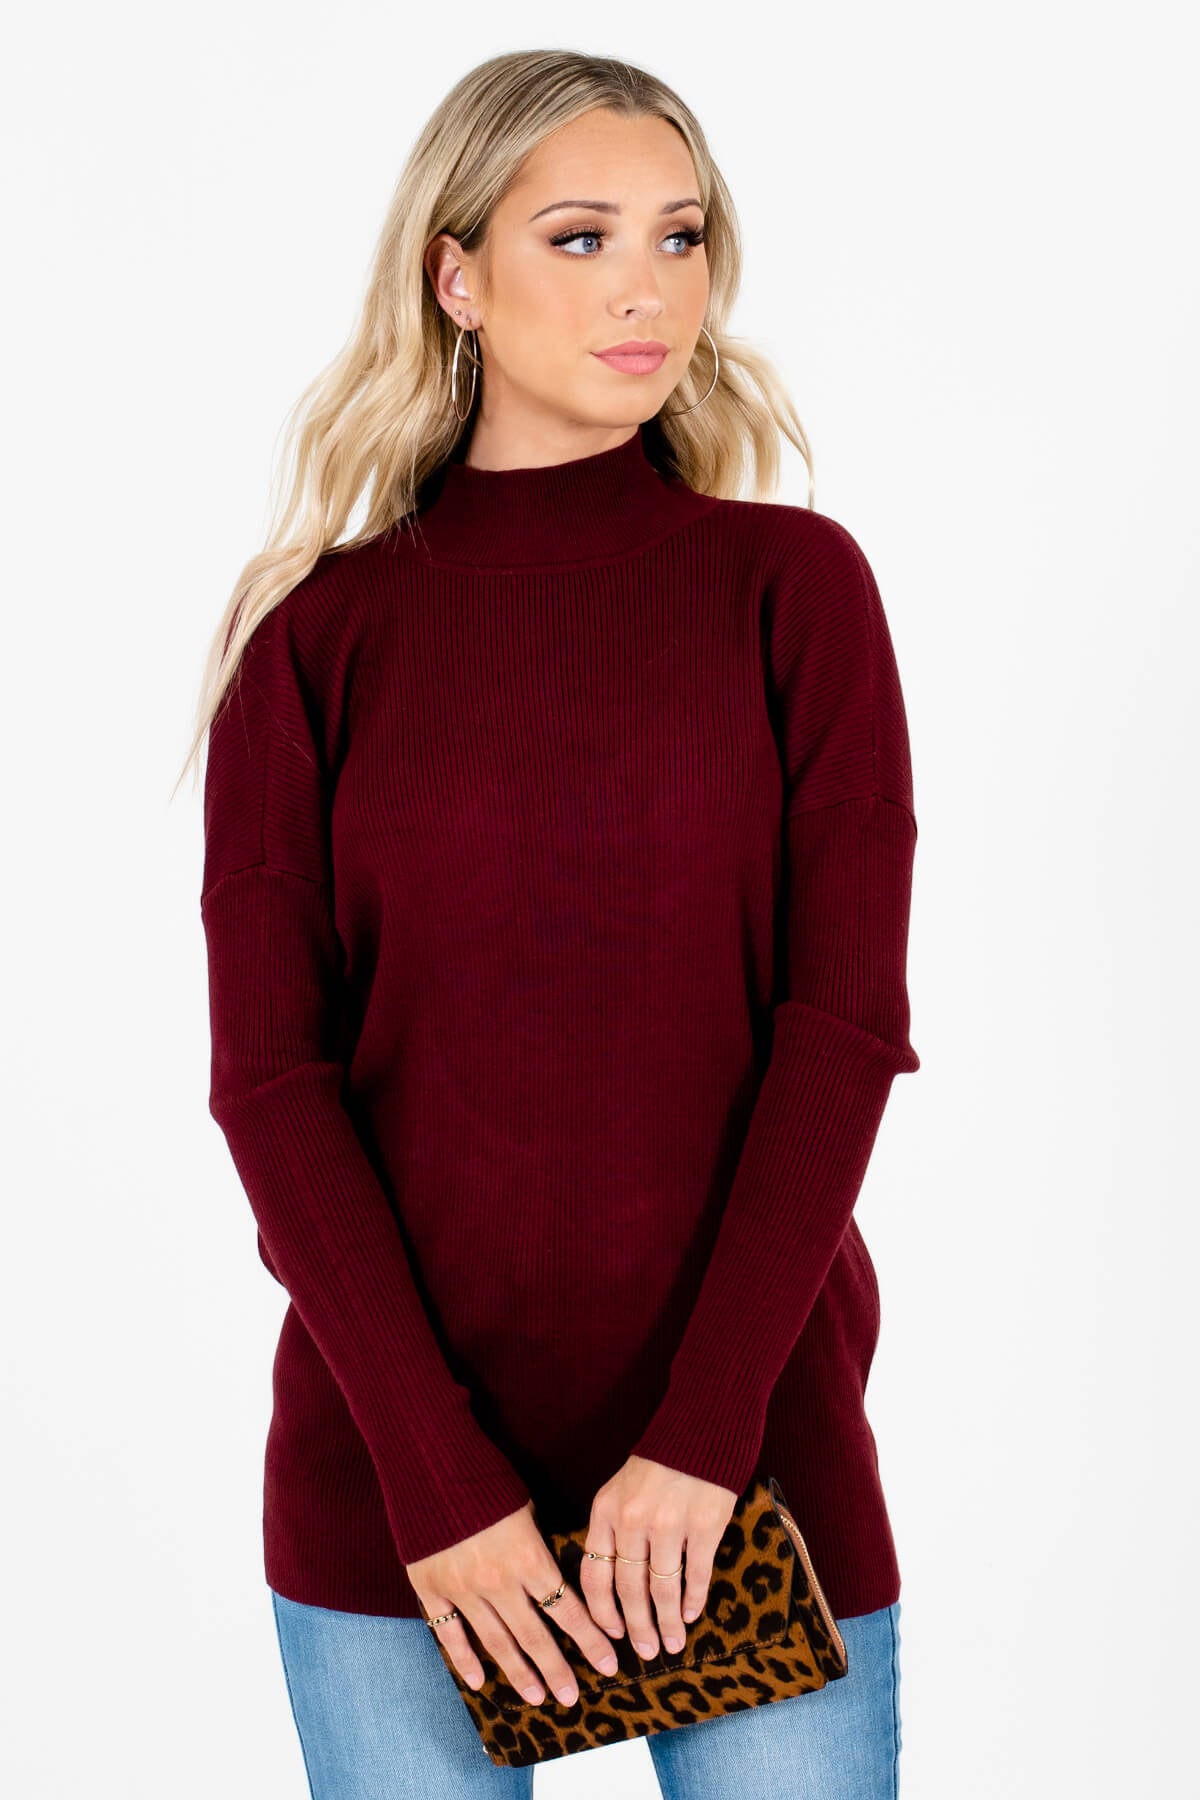 Women’s Burgundy Warm and Cozy Boutique Clothing